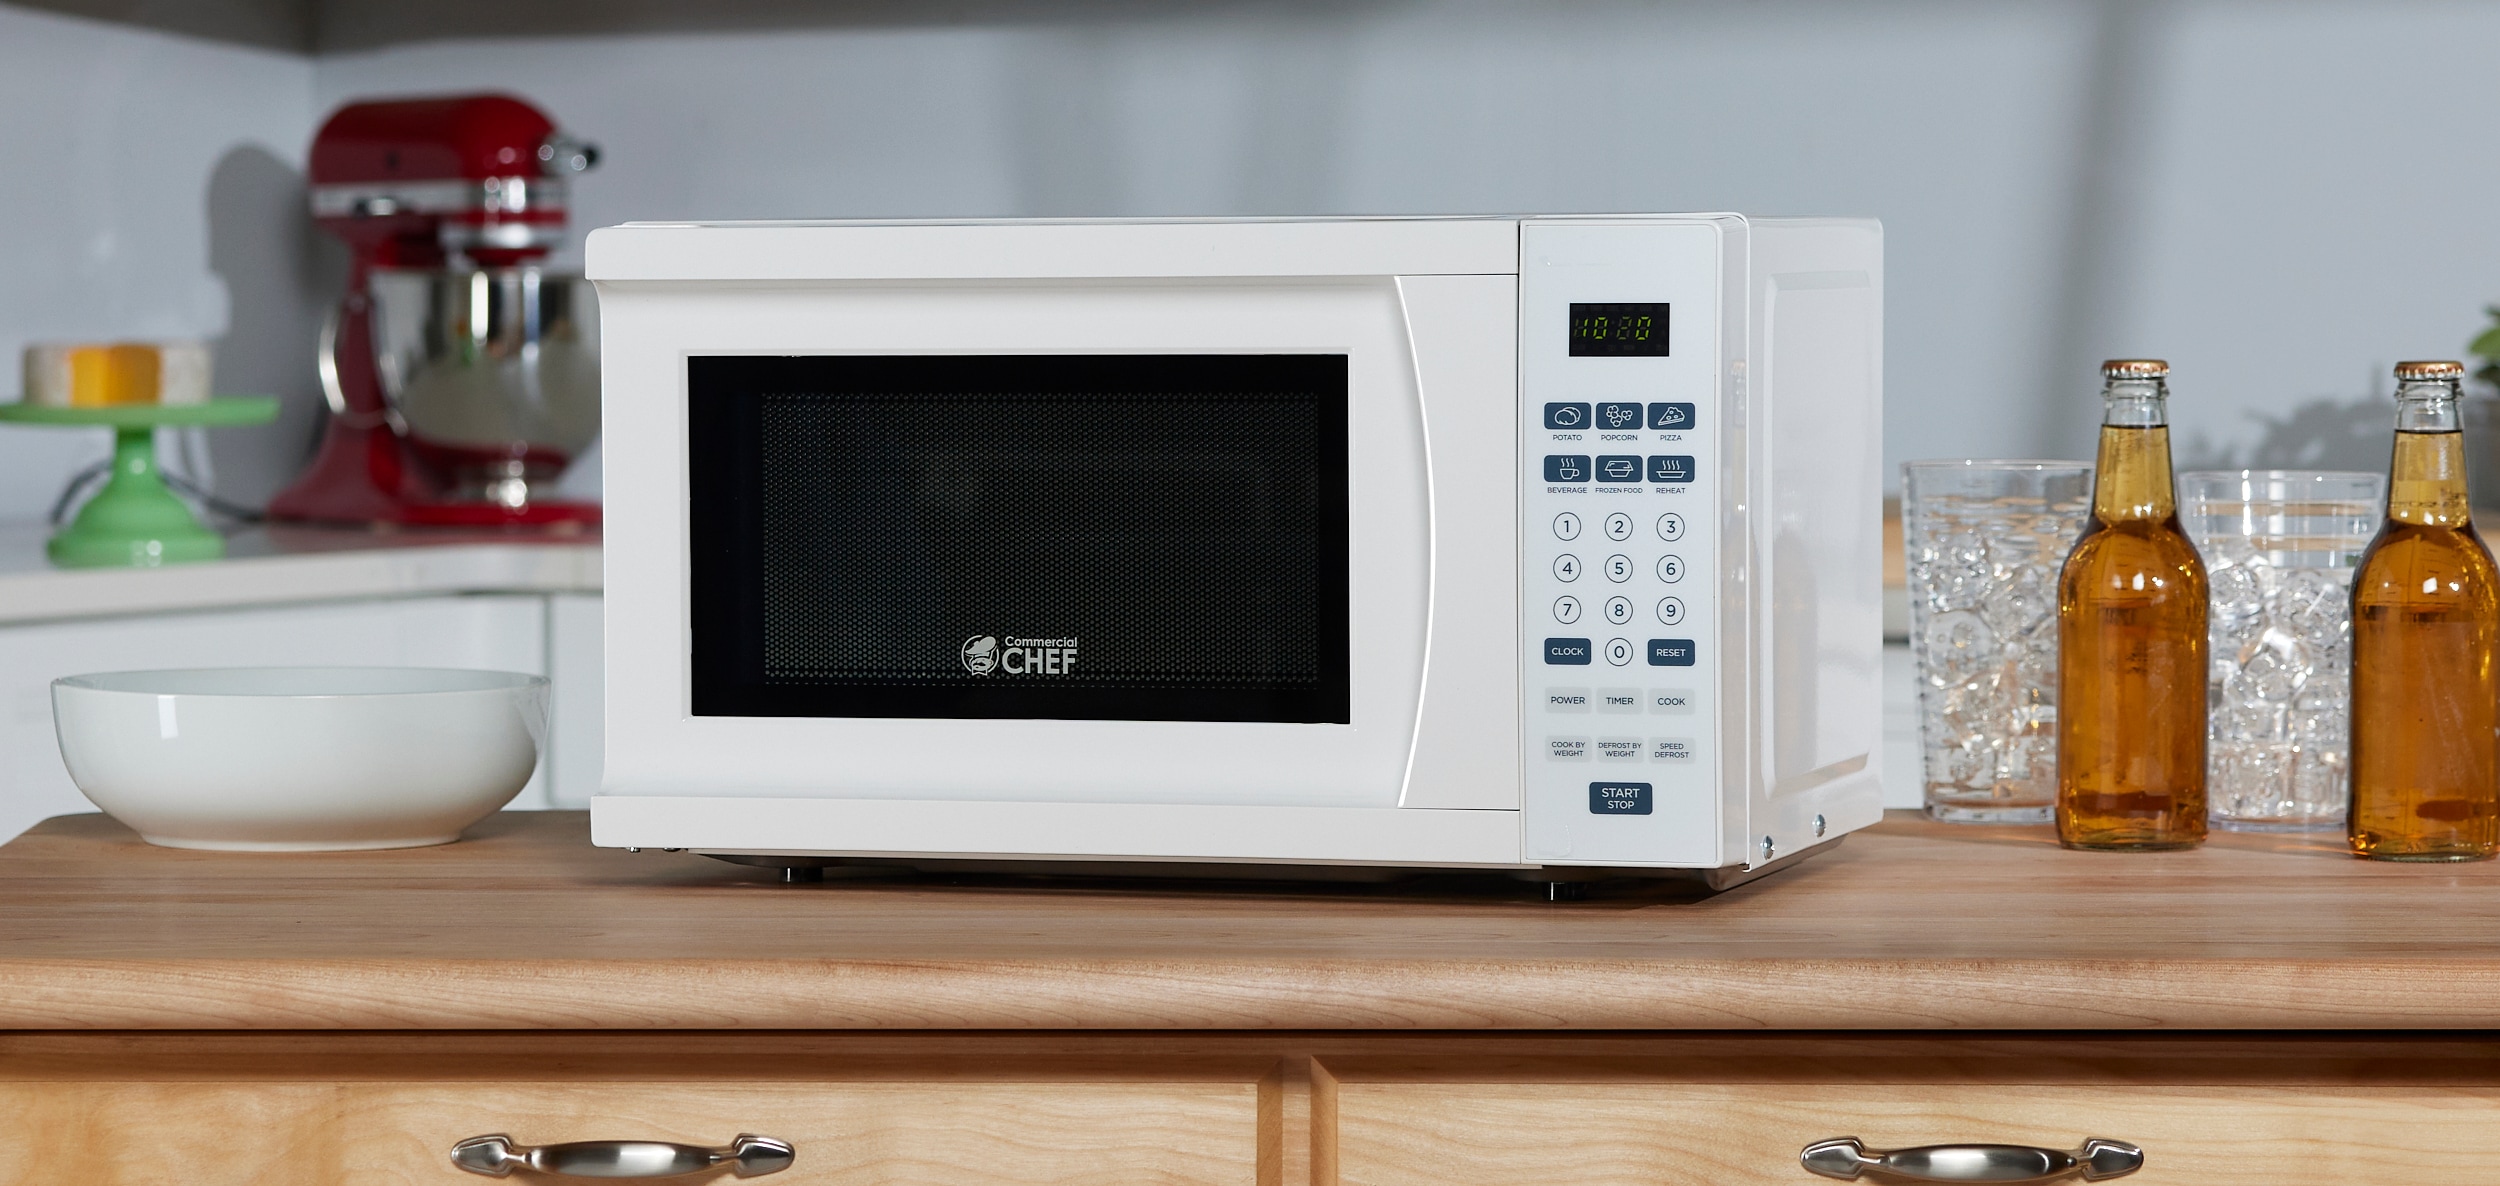  Commercial Chef CHM770 Counter Top Microwave, 0.7 Cubic Feet &  BELLA 2 Slice Toaster, Quick & Even Results Every Time, Wide Slots Fit Any  Size Bread Like Bagels or Texas Toast